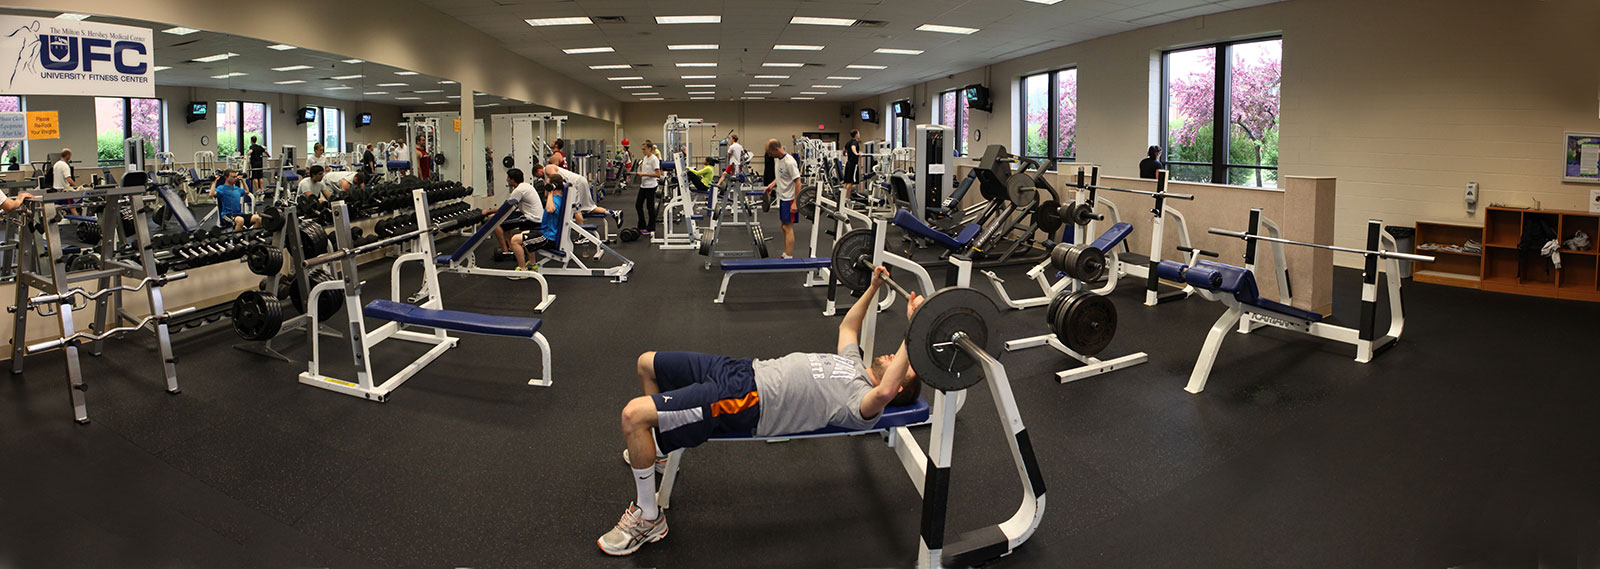 Fitness Center endowment offers funds to medical students - Penn State ...